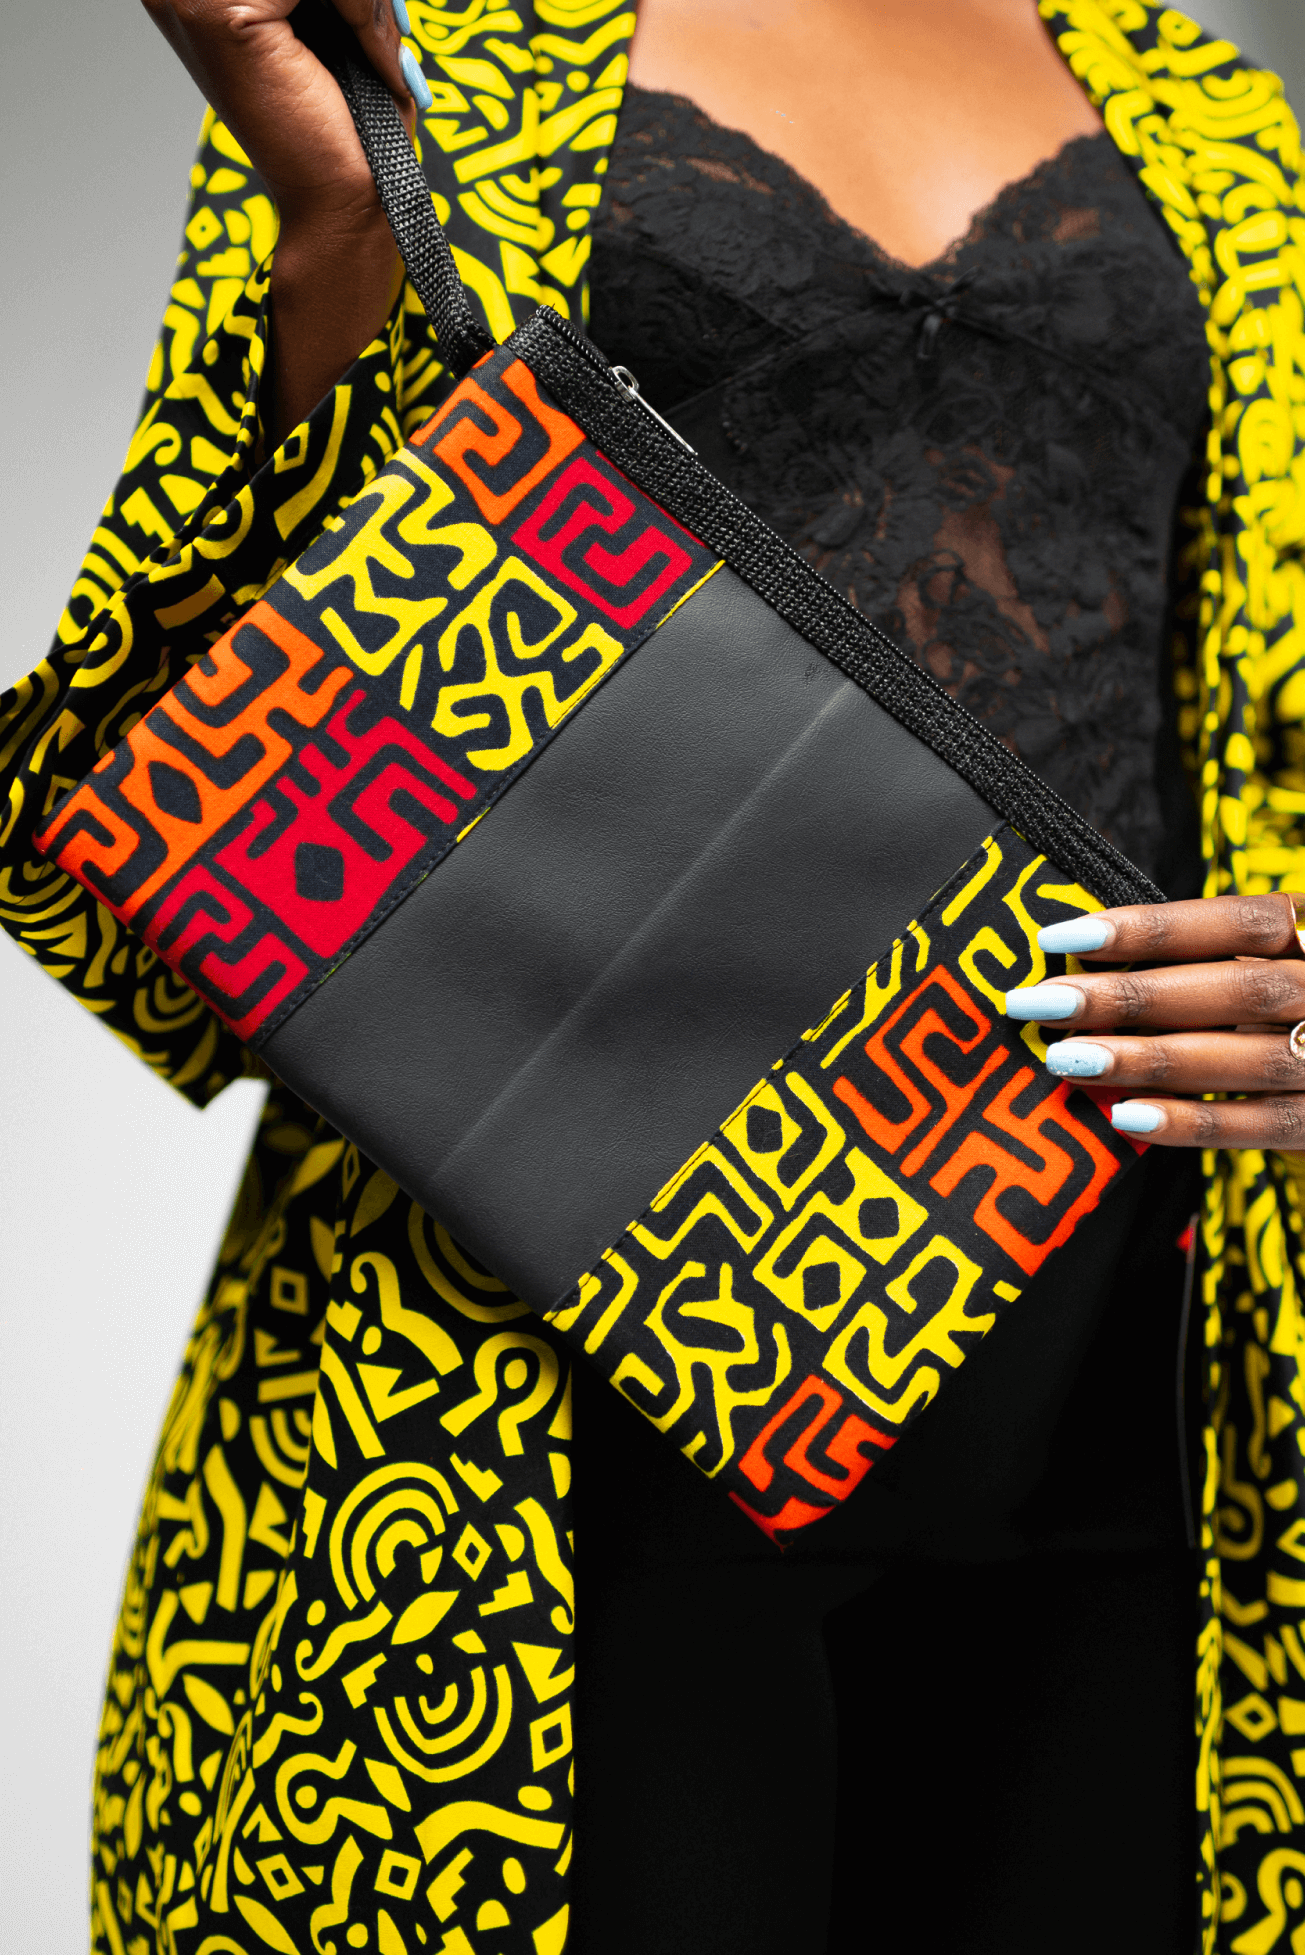 Shop Turquoise Clutch Bag by ELISKIS on Arrai. Discover stylish, affordable clothing, jewelry, handbags and unique handmade pieces from top Kenyan & African fashion brands prioritising sustainability and quality craftsmanship.